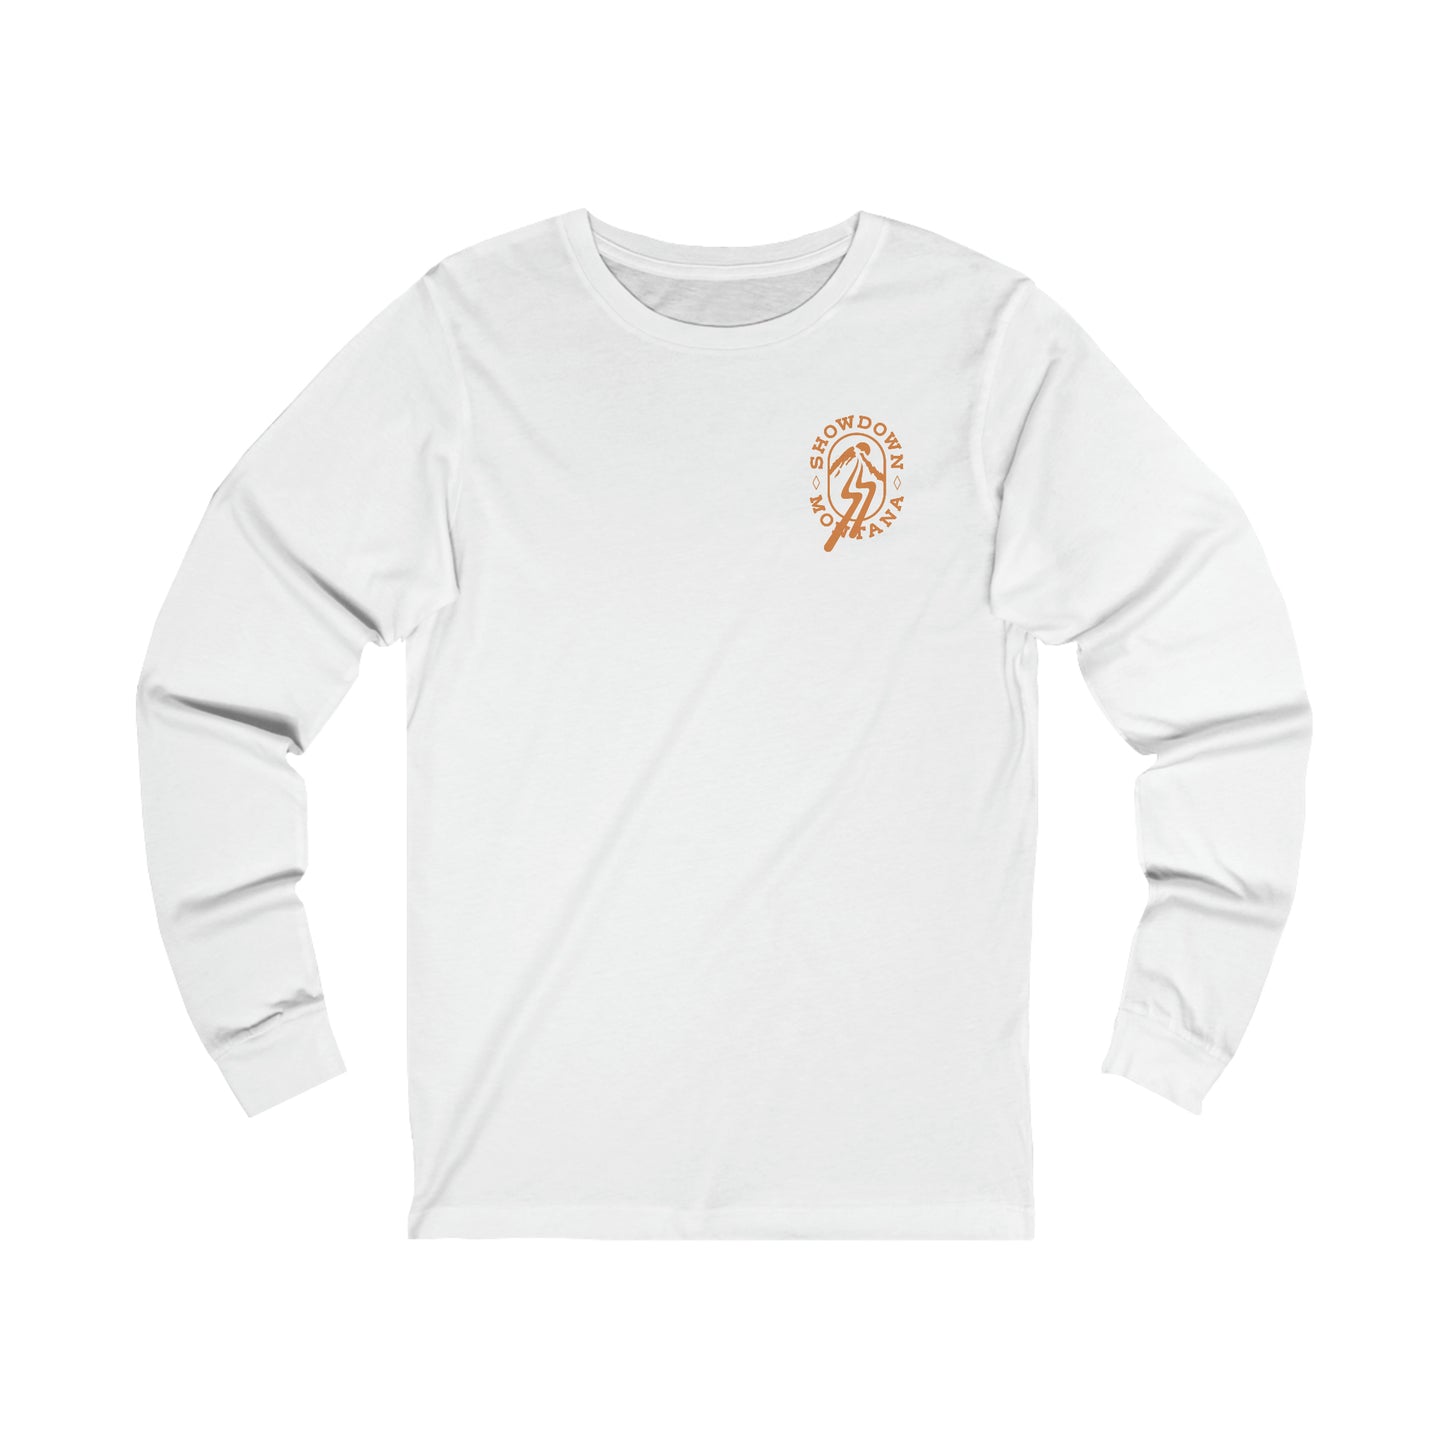 Retro Cows Are Fed Jersey Long Sleeve Tee